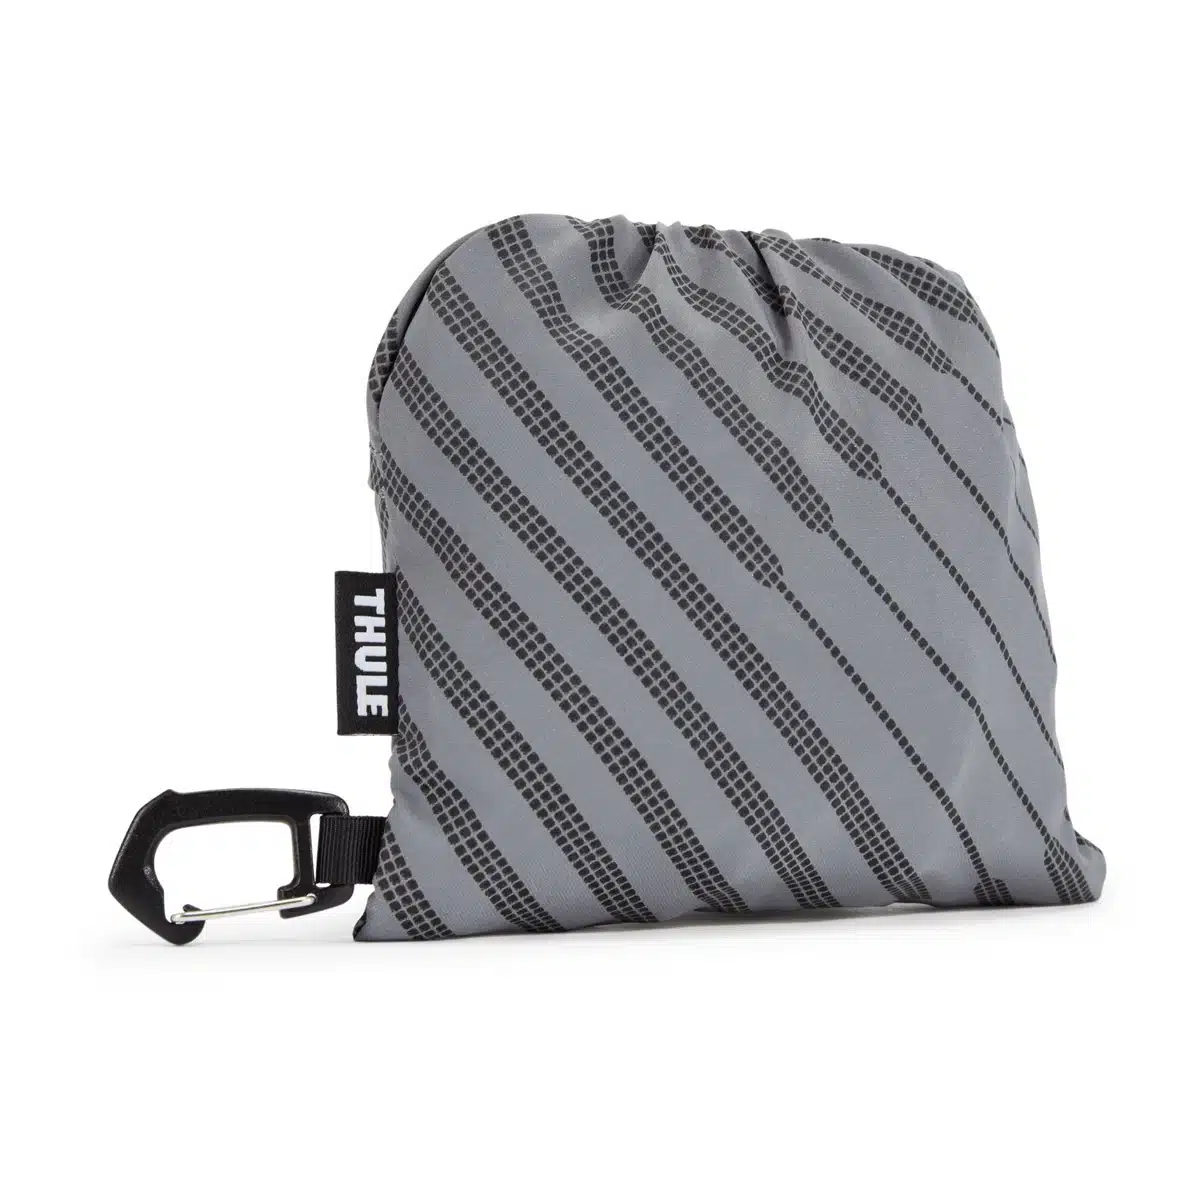 Thule Backpack Rain Cover in pouch